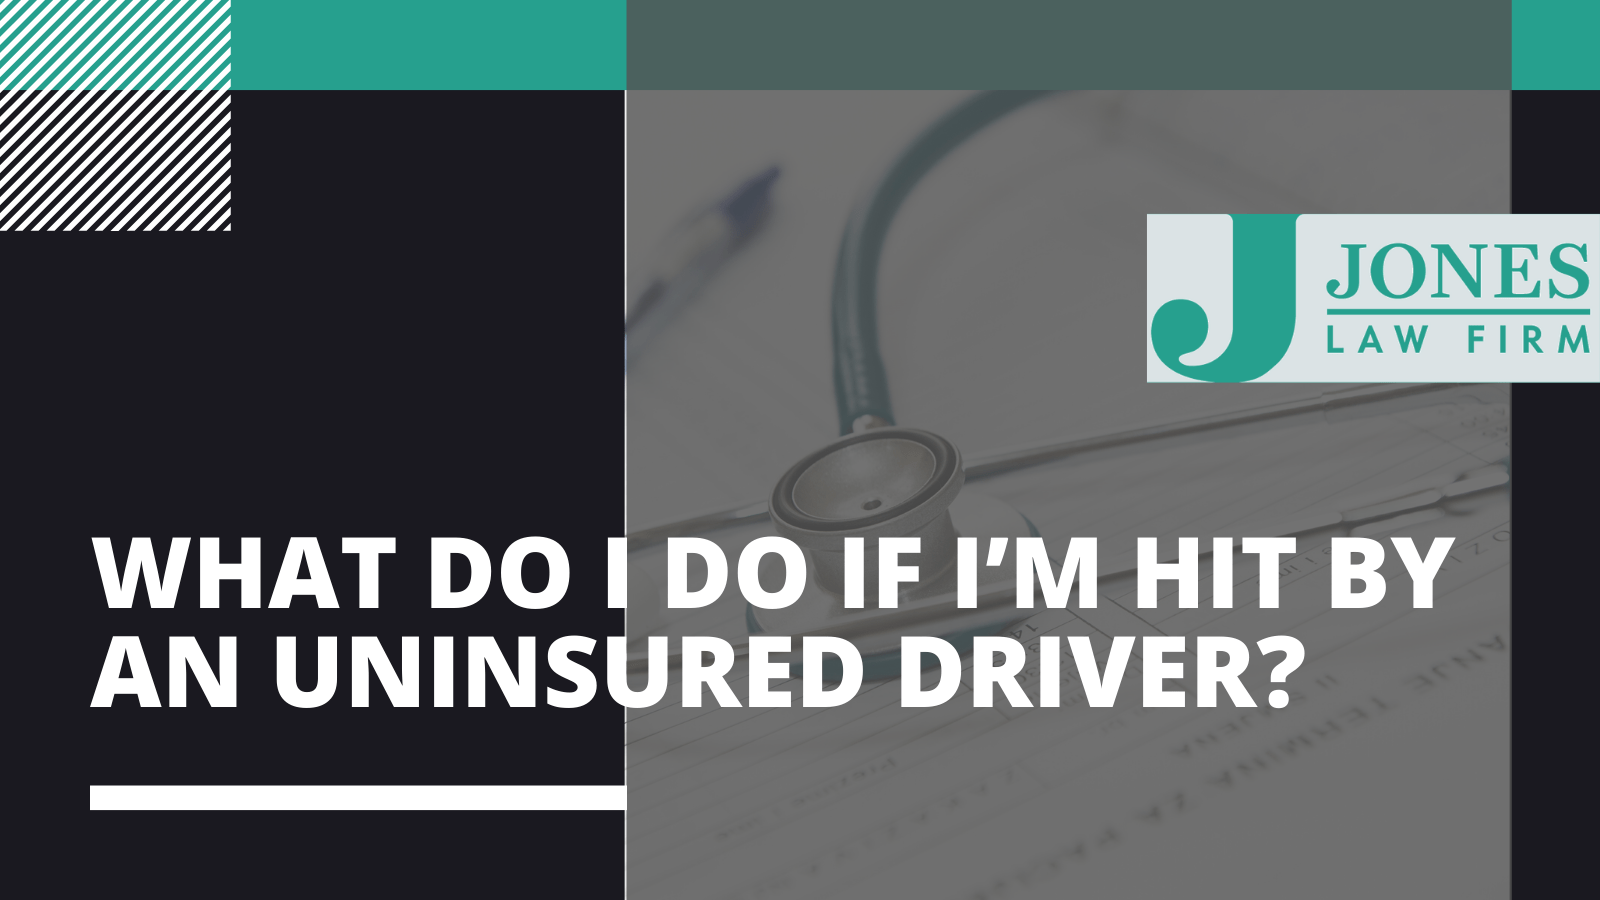 What do I do if I’m hit by an uninsured driver - Jones law firm - Alexandria louisiana